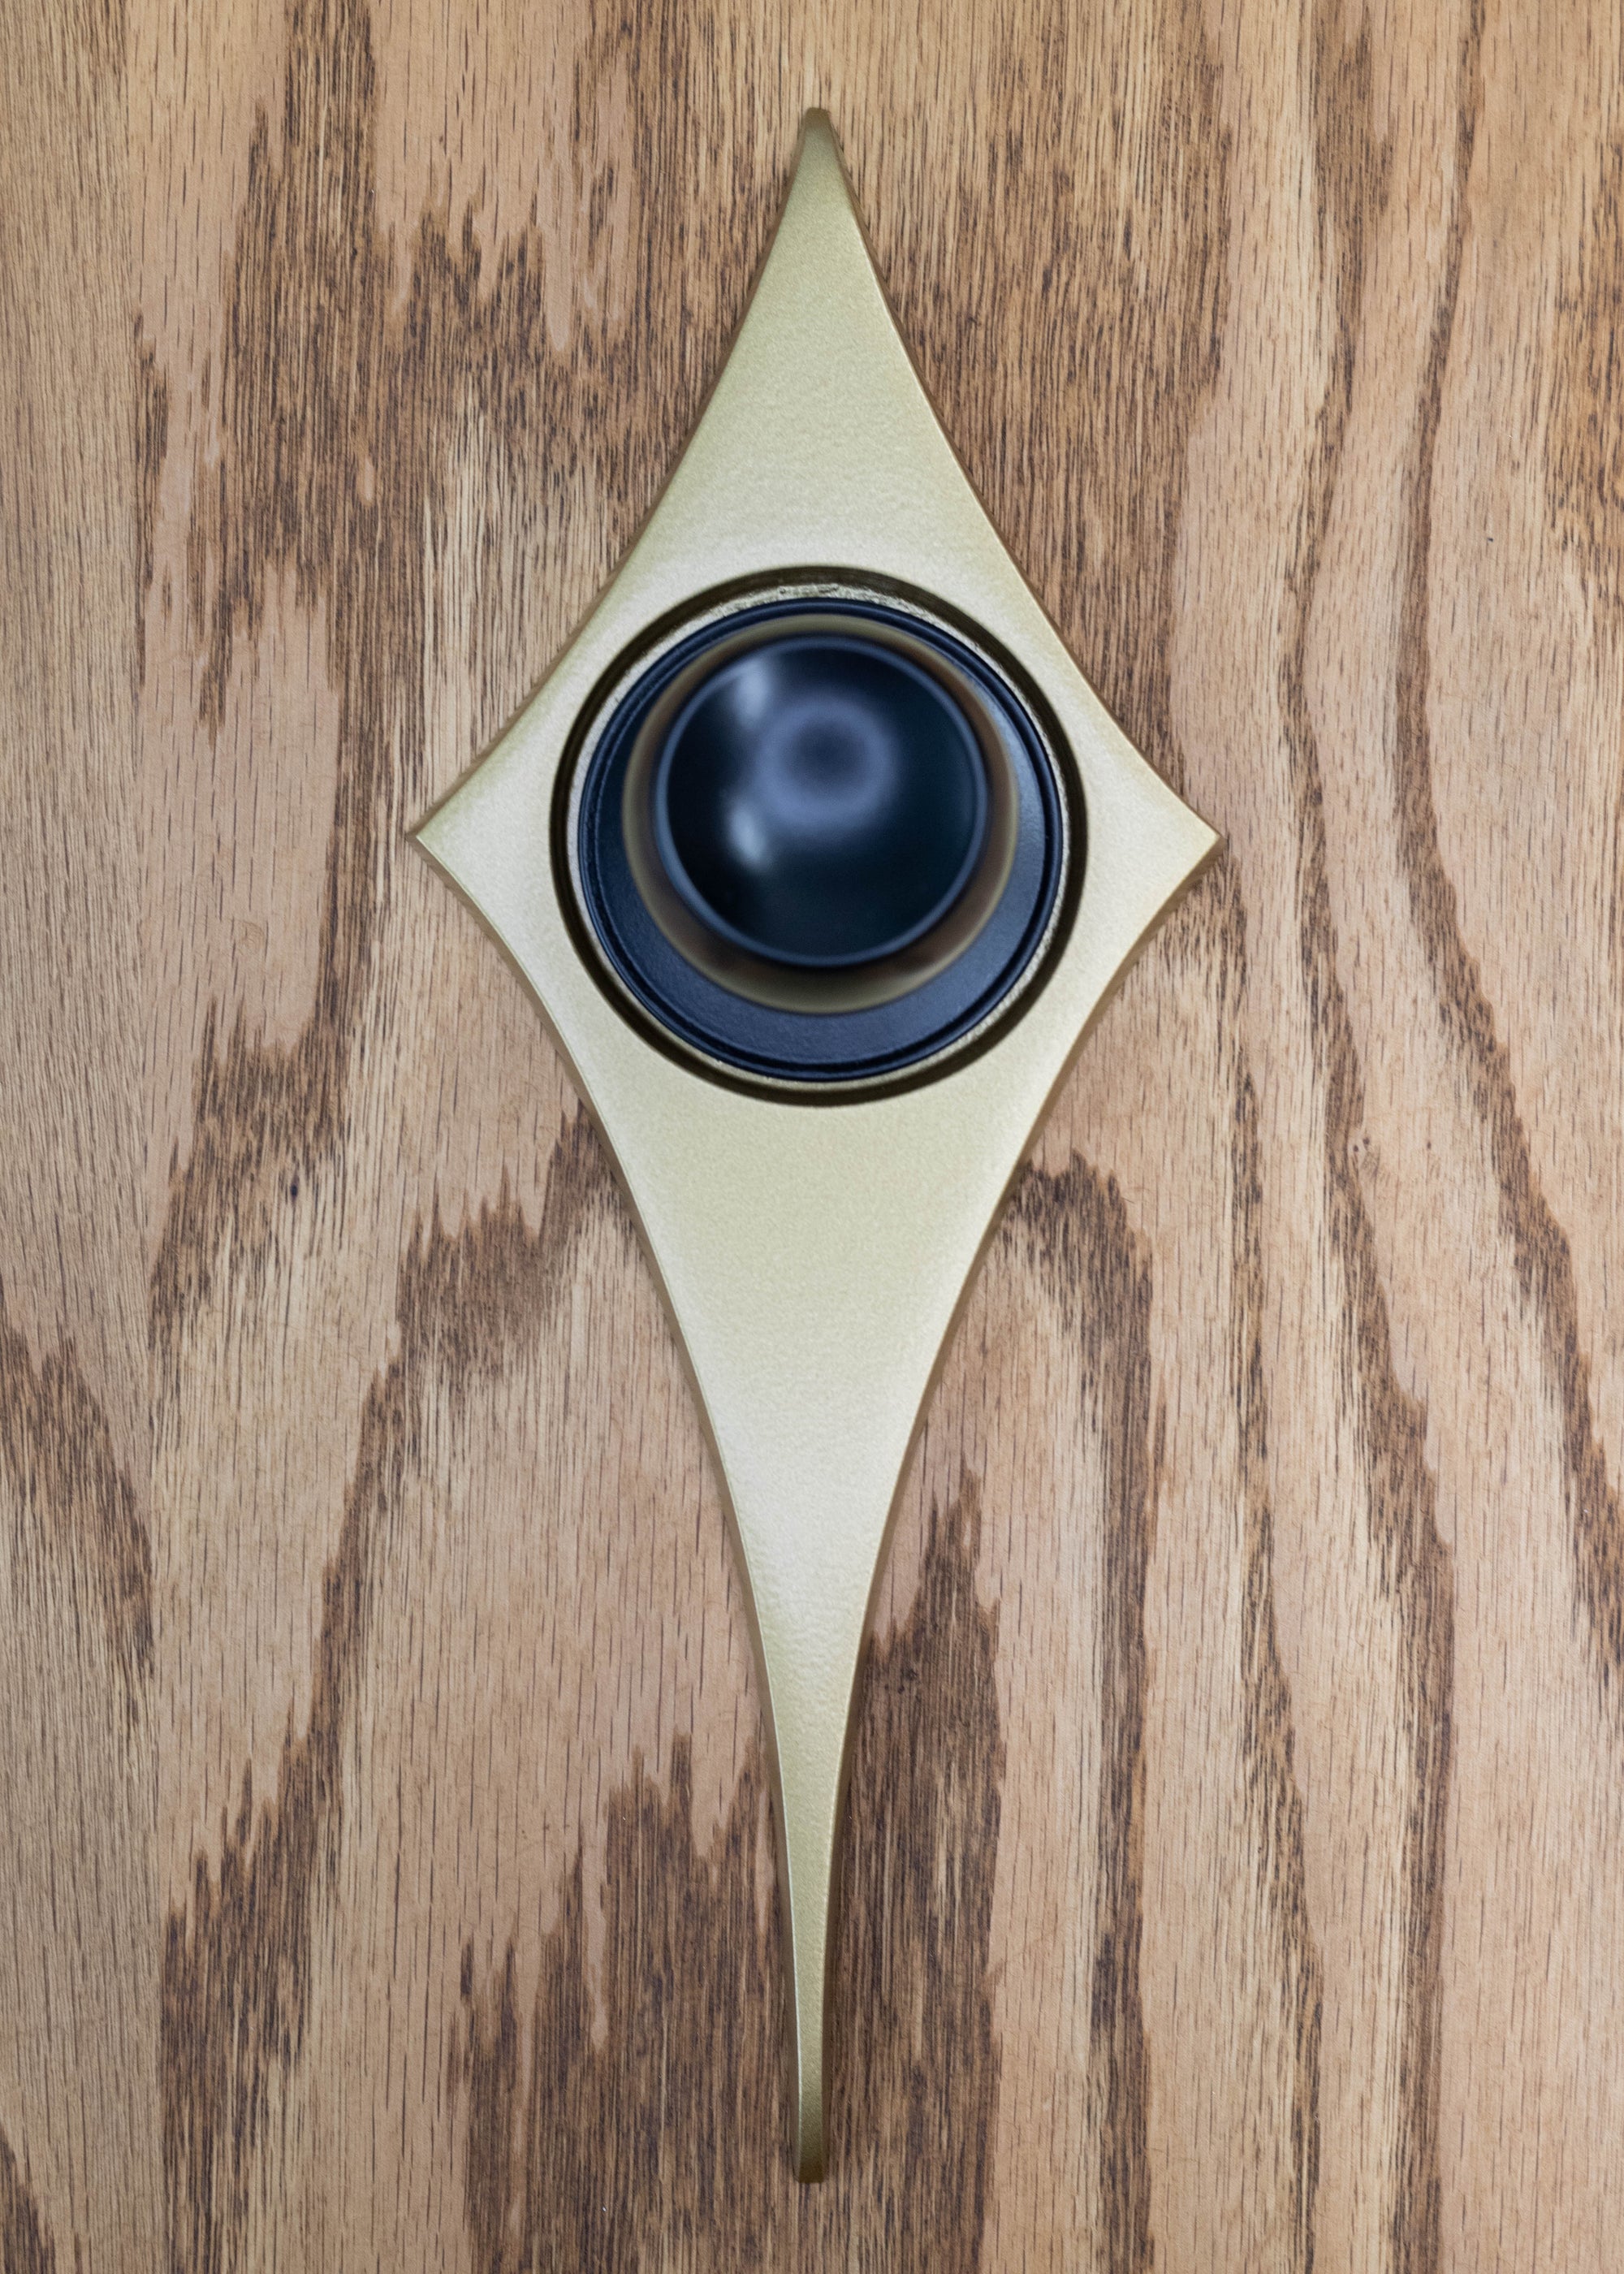 Gold comet pictured with a black doorknob. The black and gold contrast nicely!